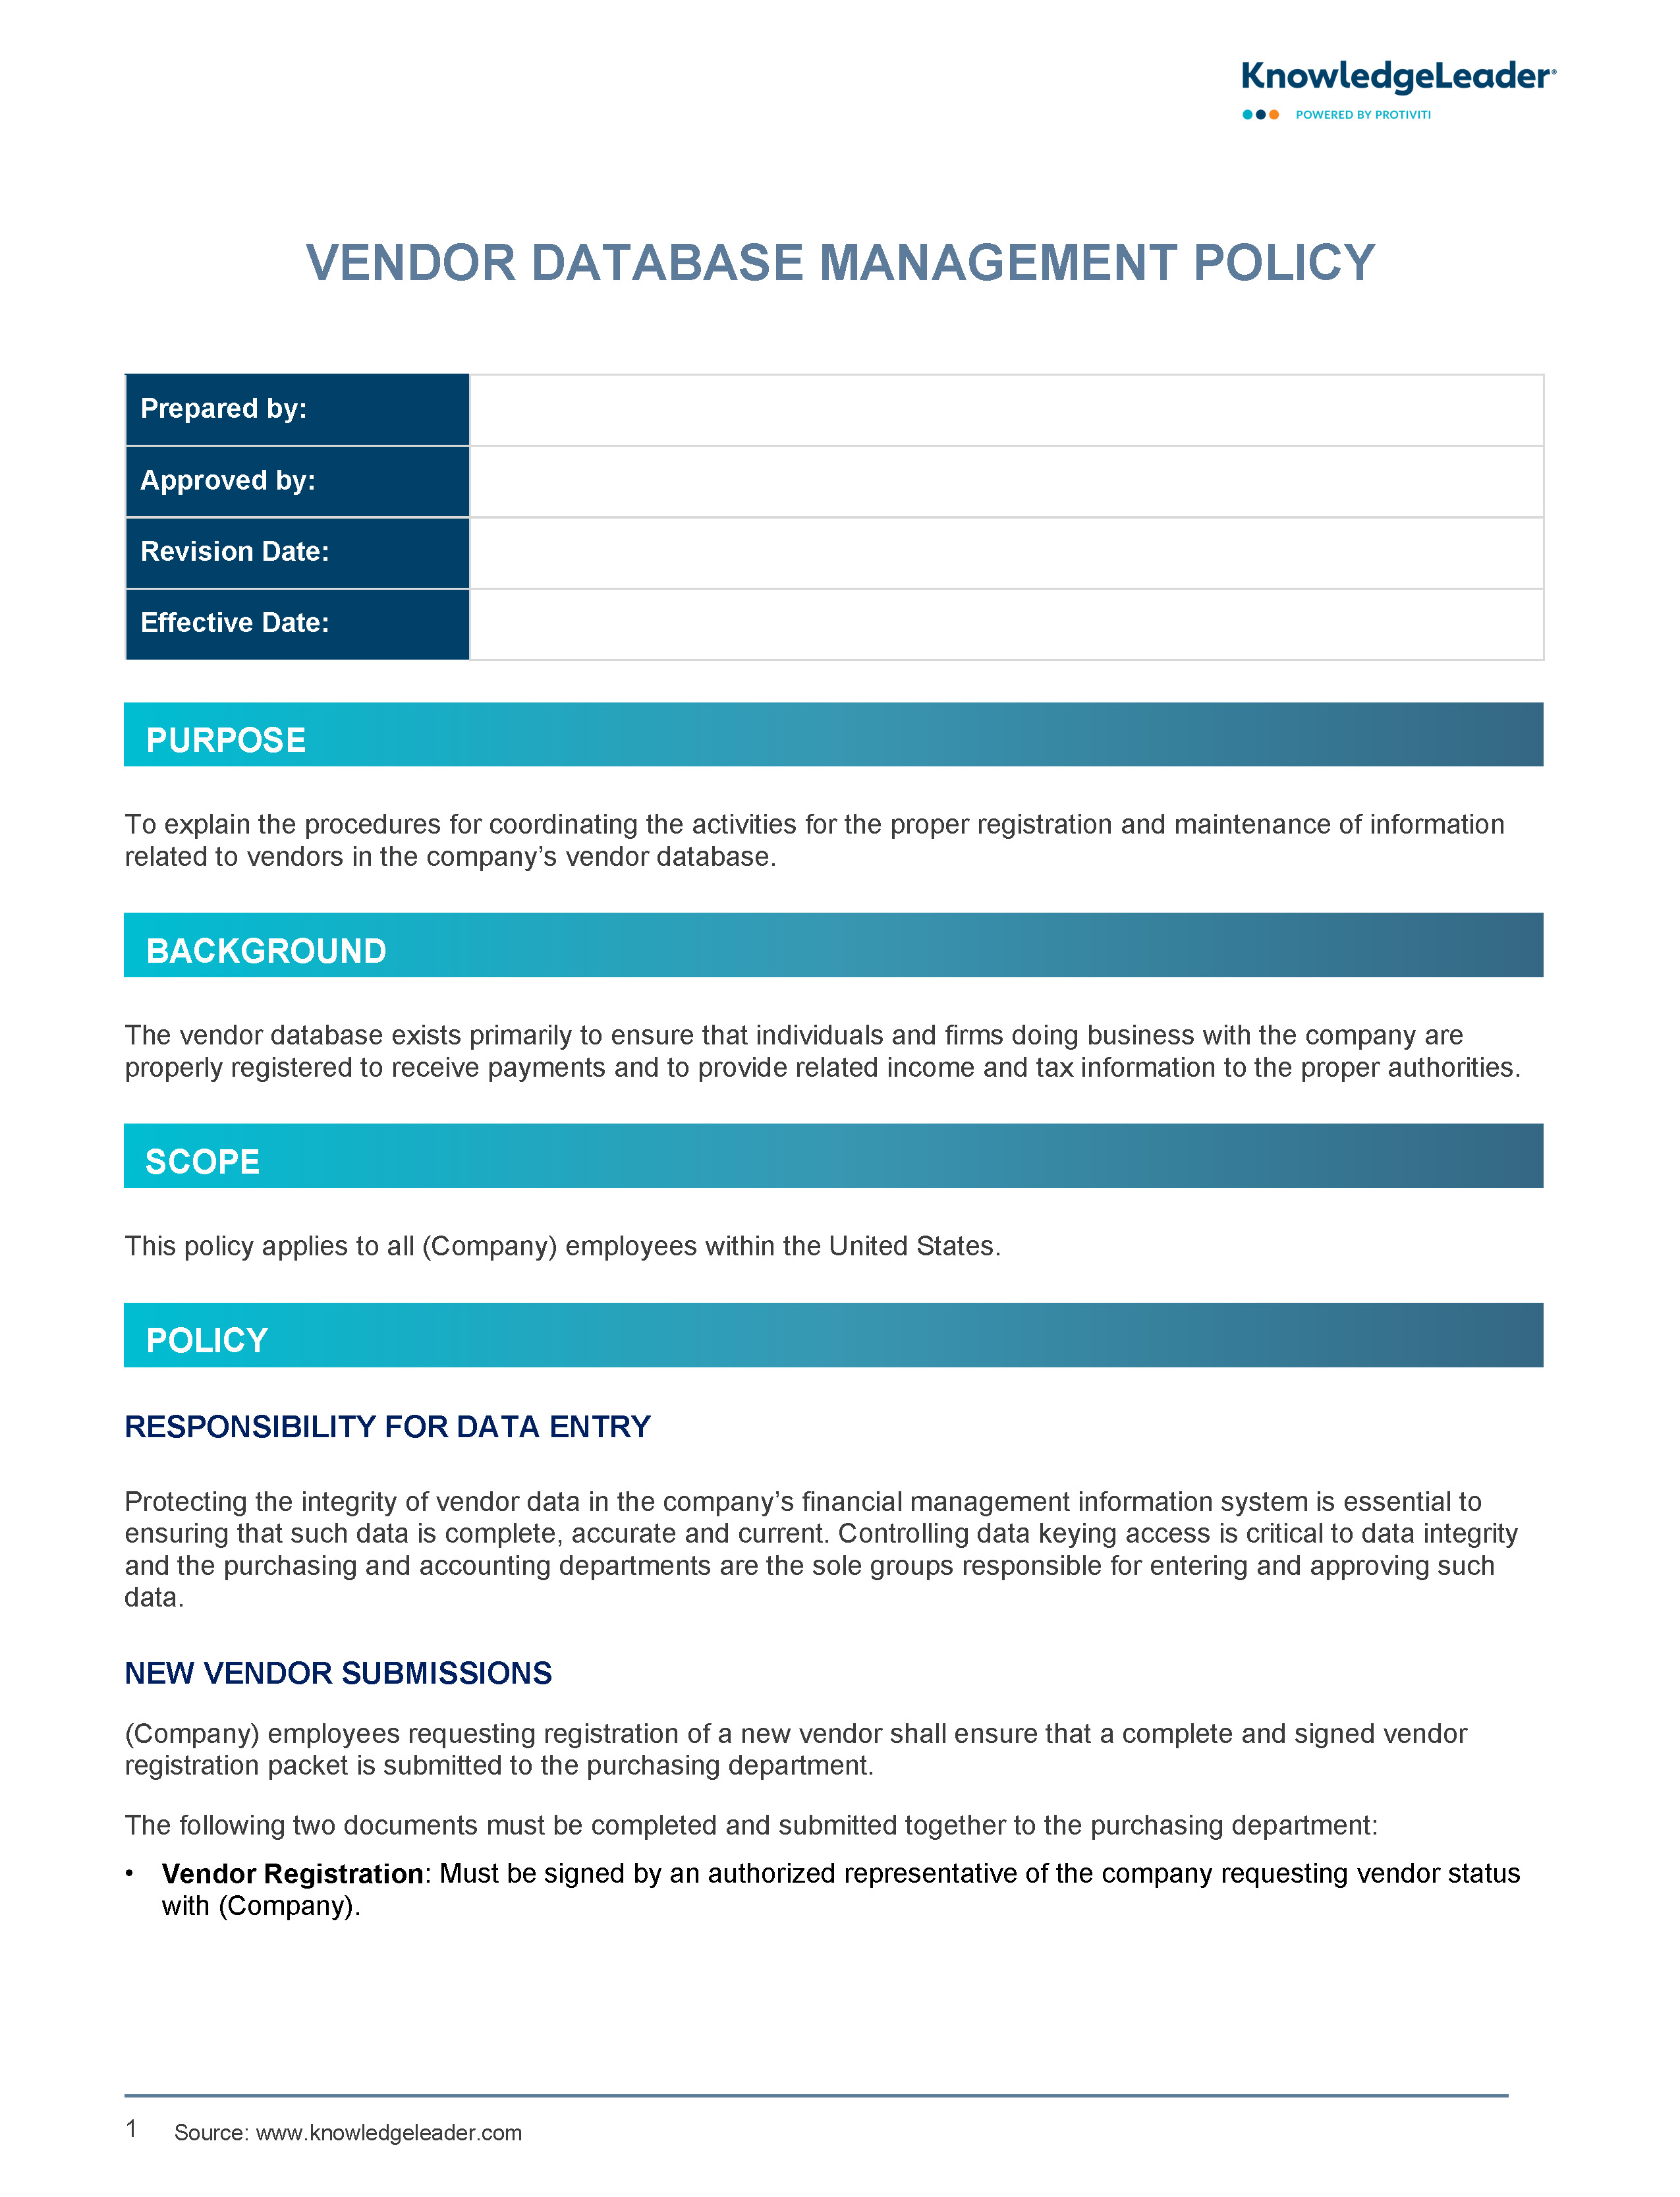 Screenshot of the first page of Vendor Database Management Policy